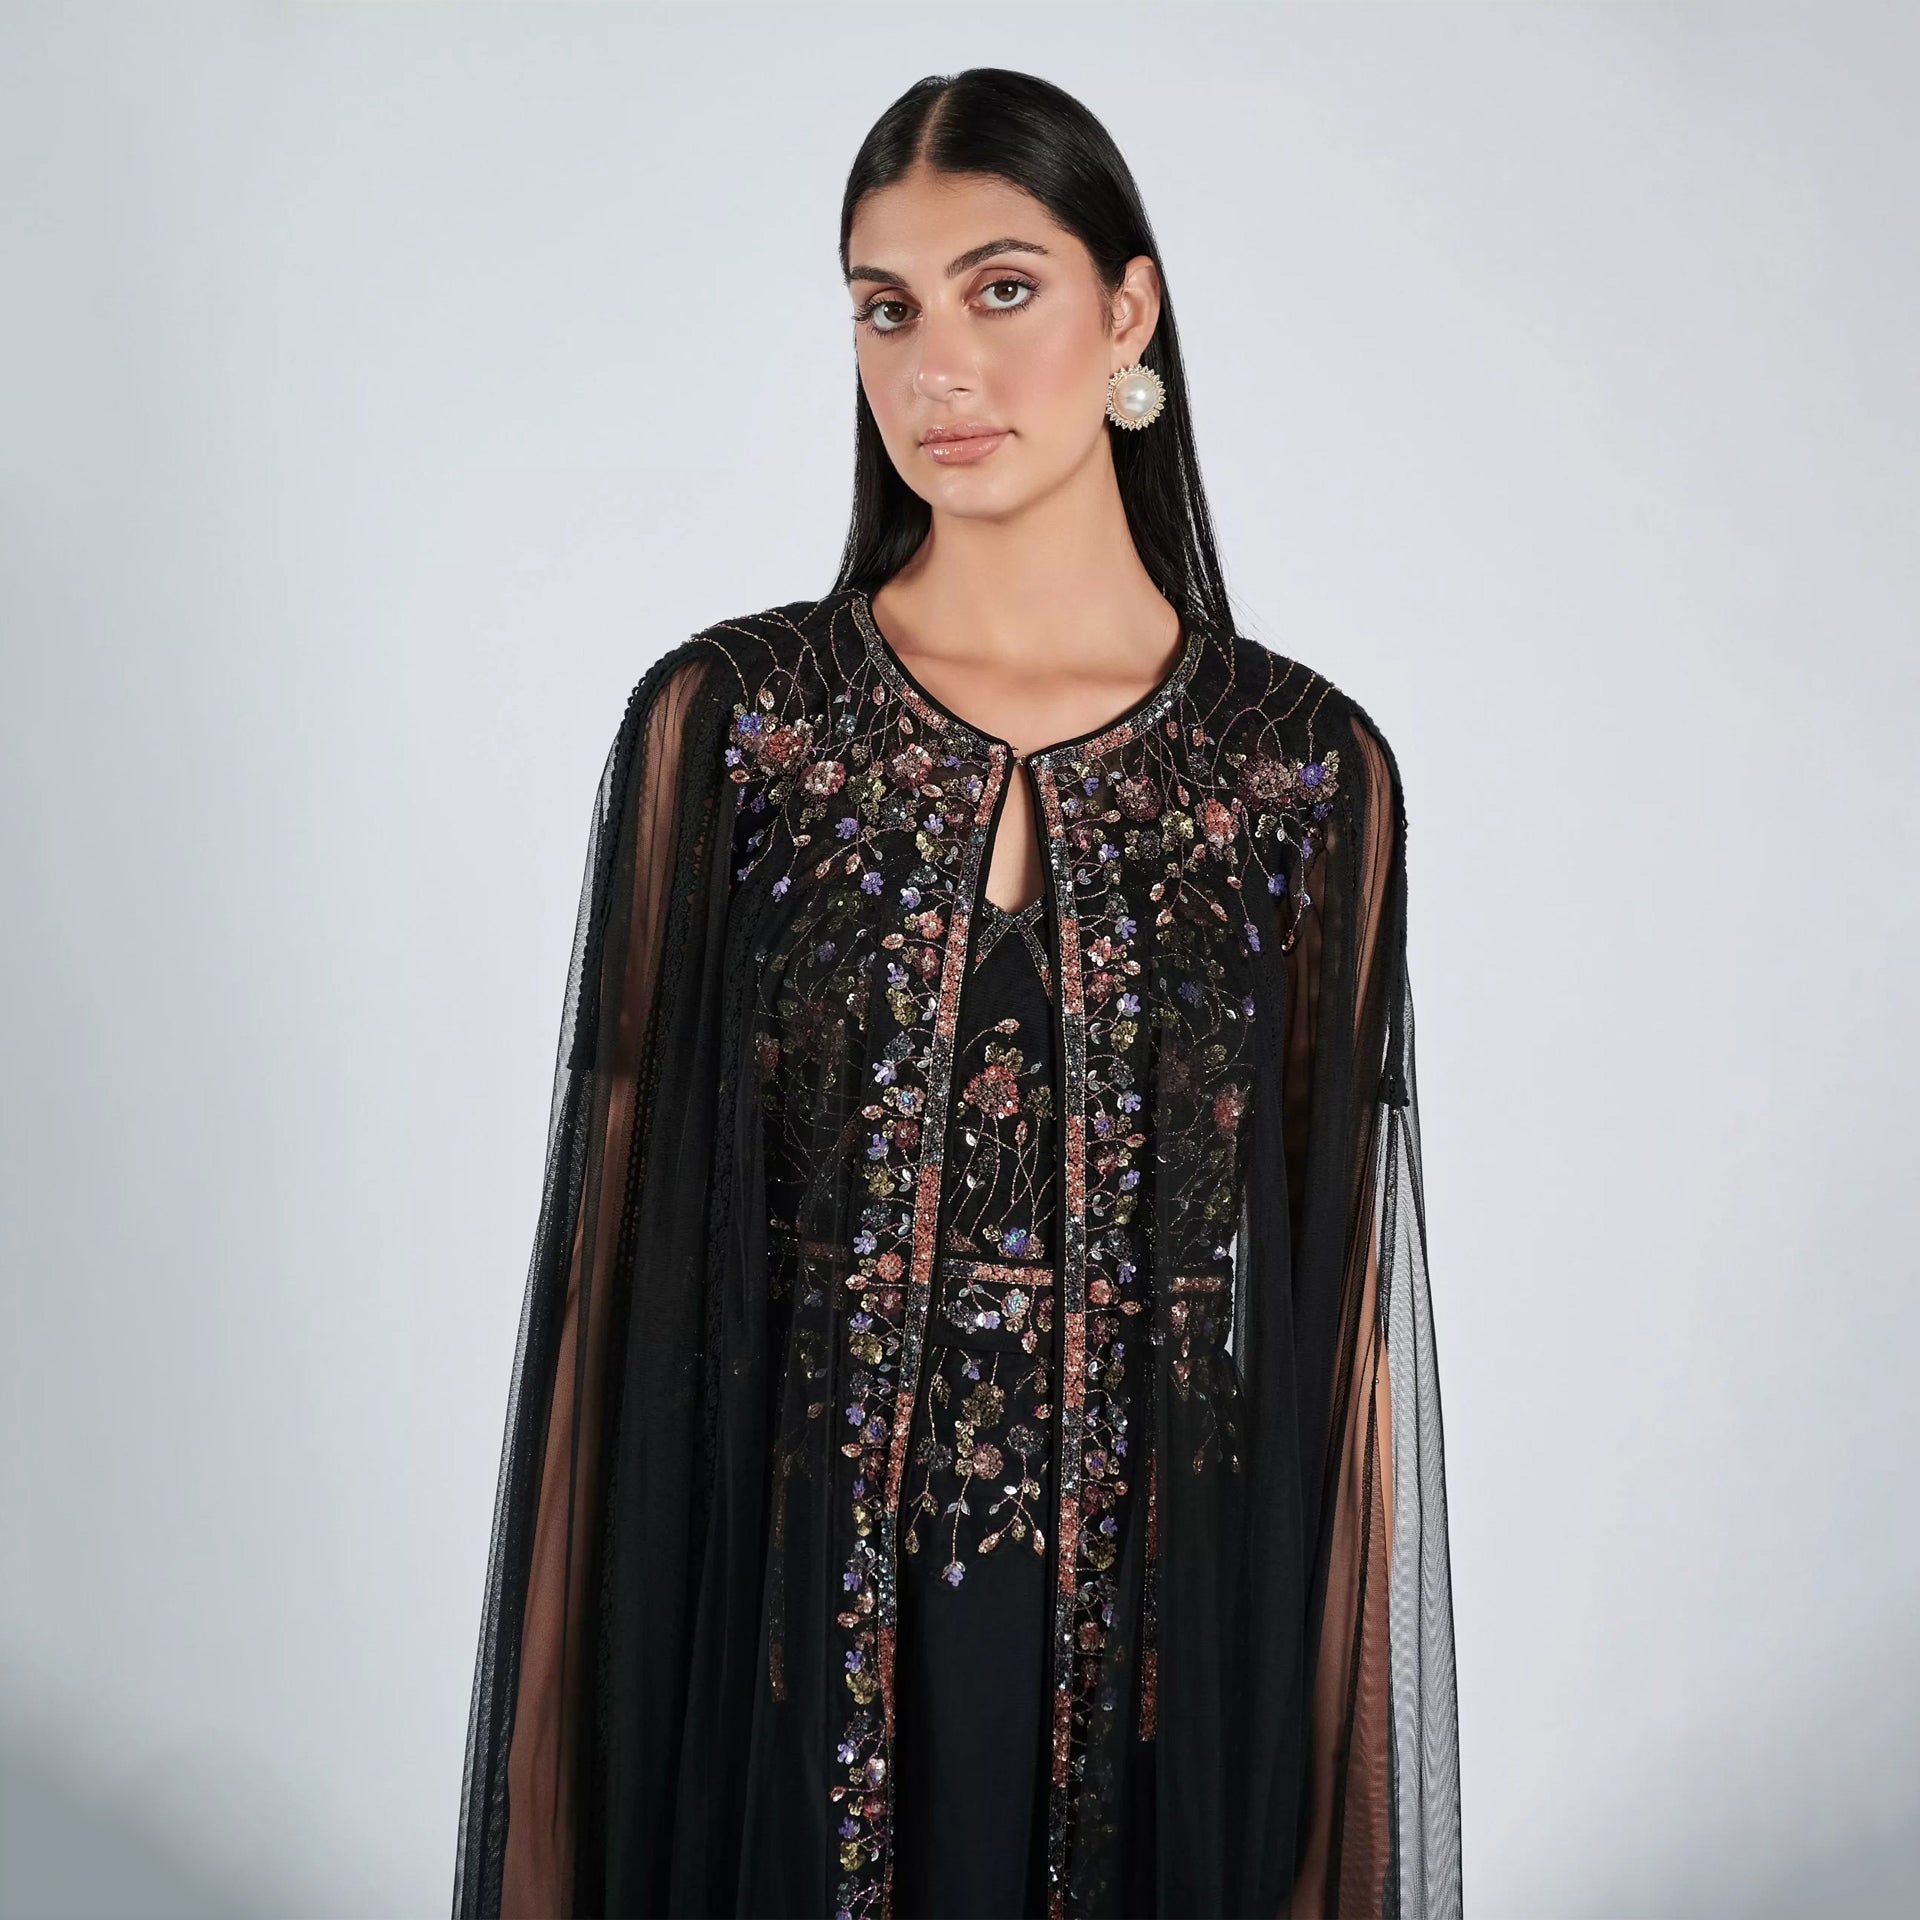 Black Embroidery Sleeveless Dress with Chiffon Cape From Shalky